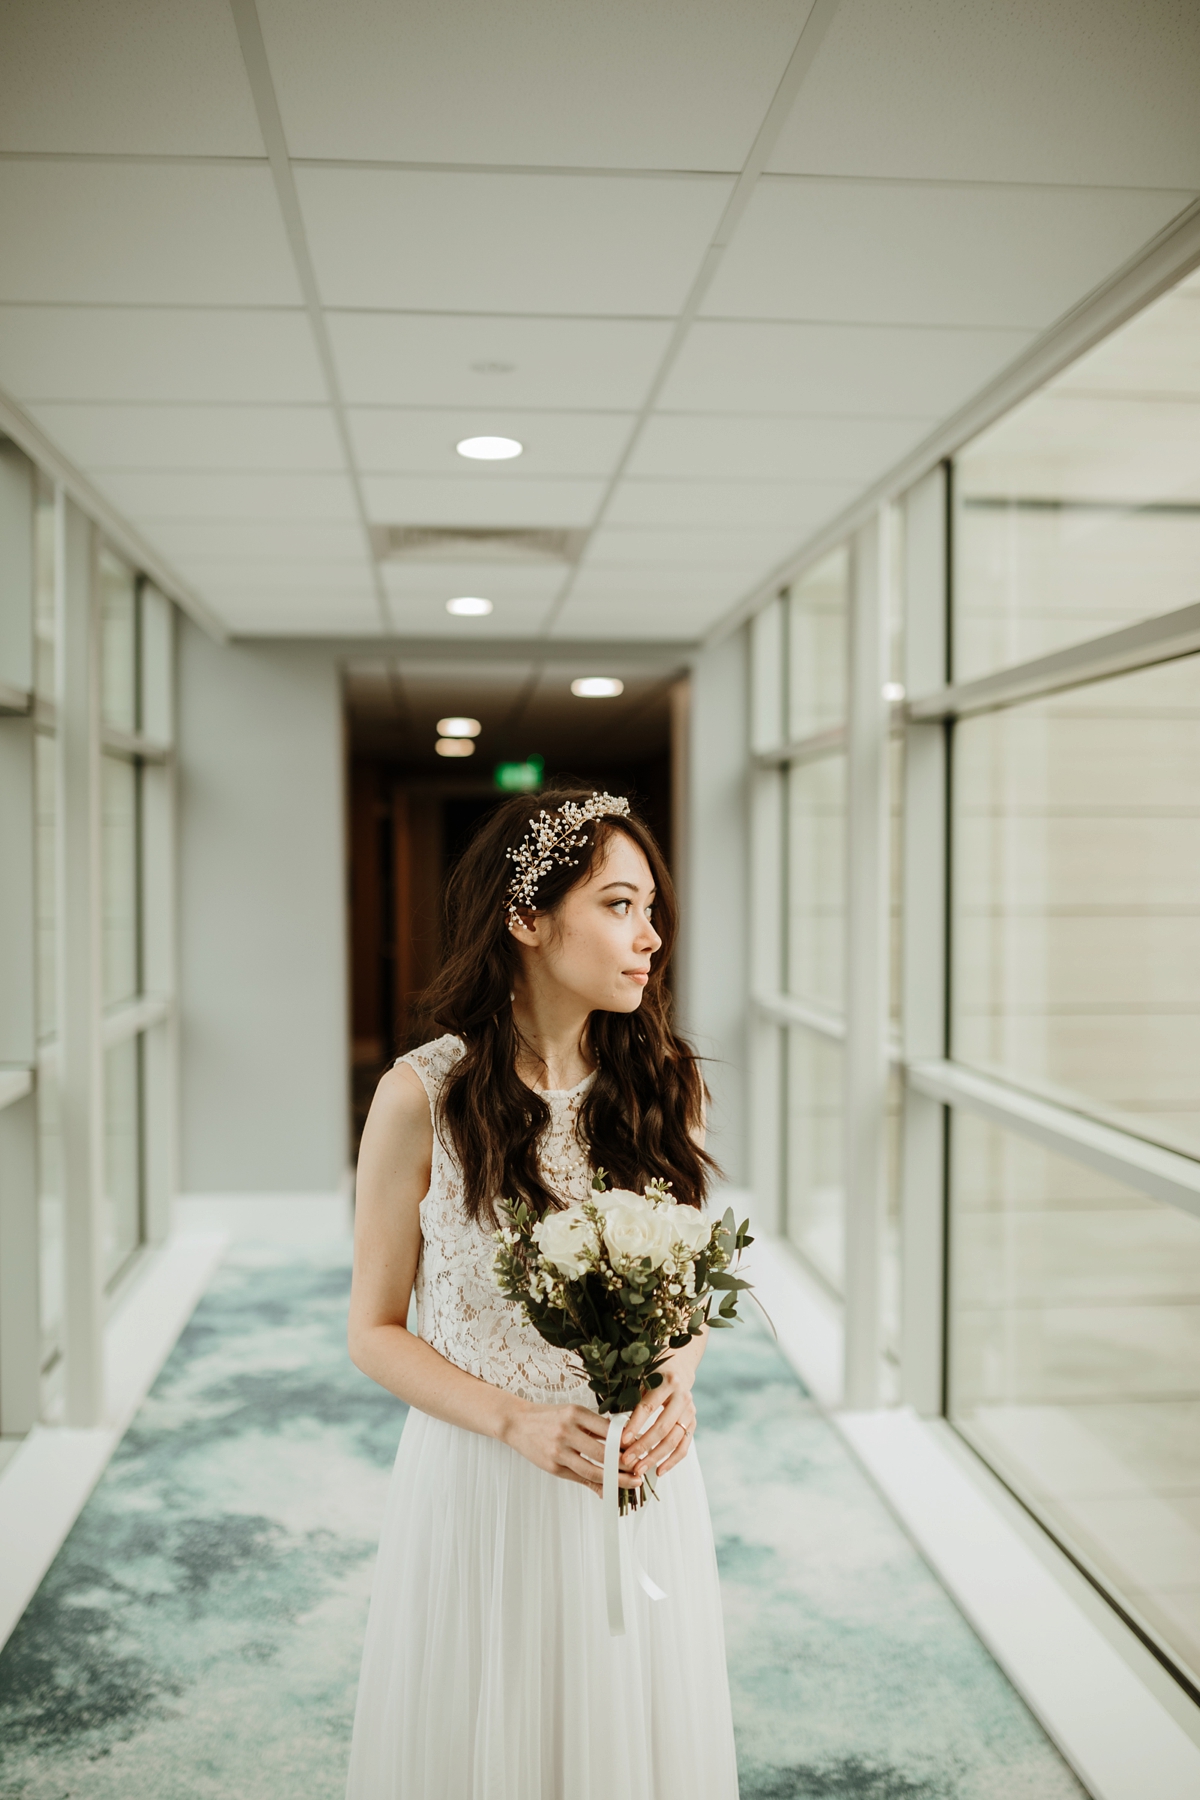 3 A BHLDN dress for a low key and intimate wedding